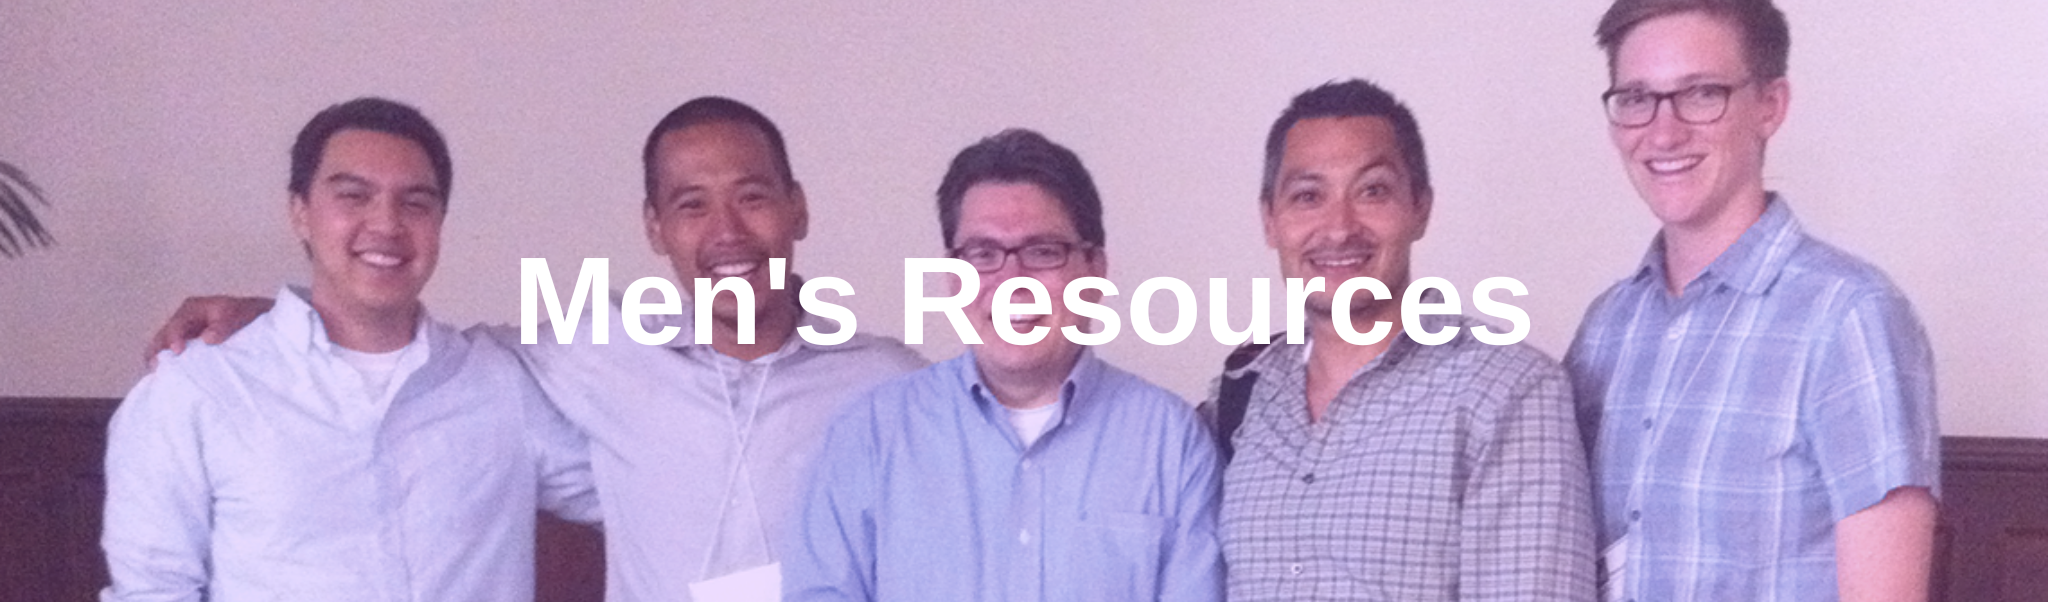 Men's Resources Resource Bar. The image is of five men in blue collared shirts with the words "Men's Resources" written in white overtop of them. 